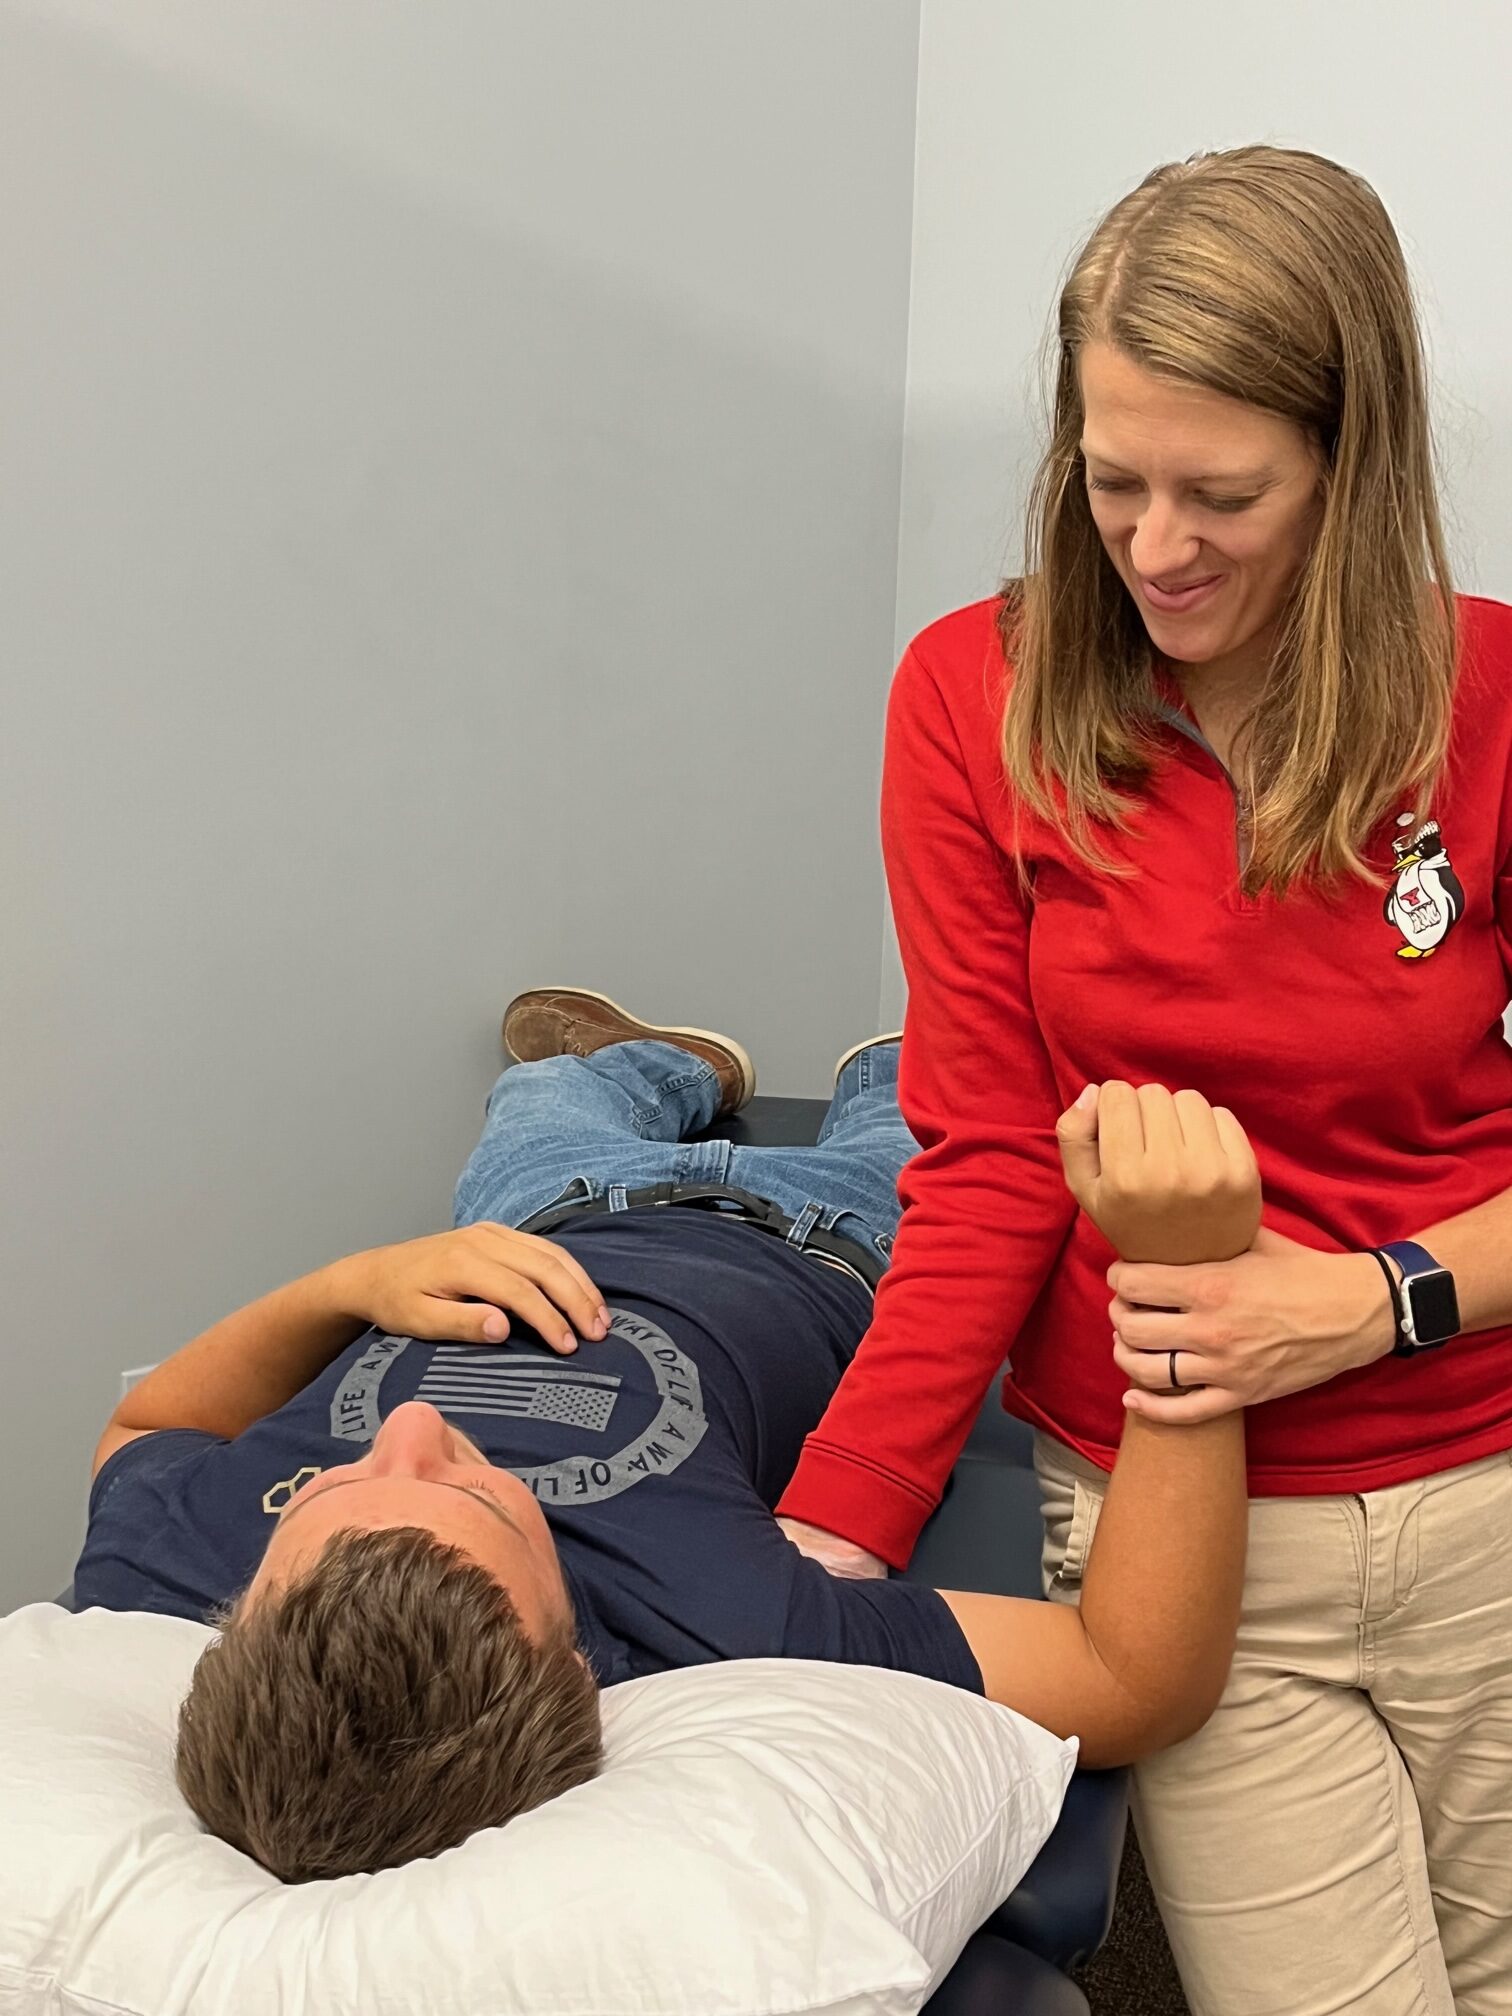 Patient receiving physical therapy.